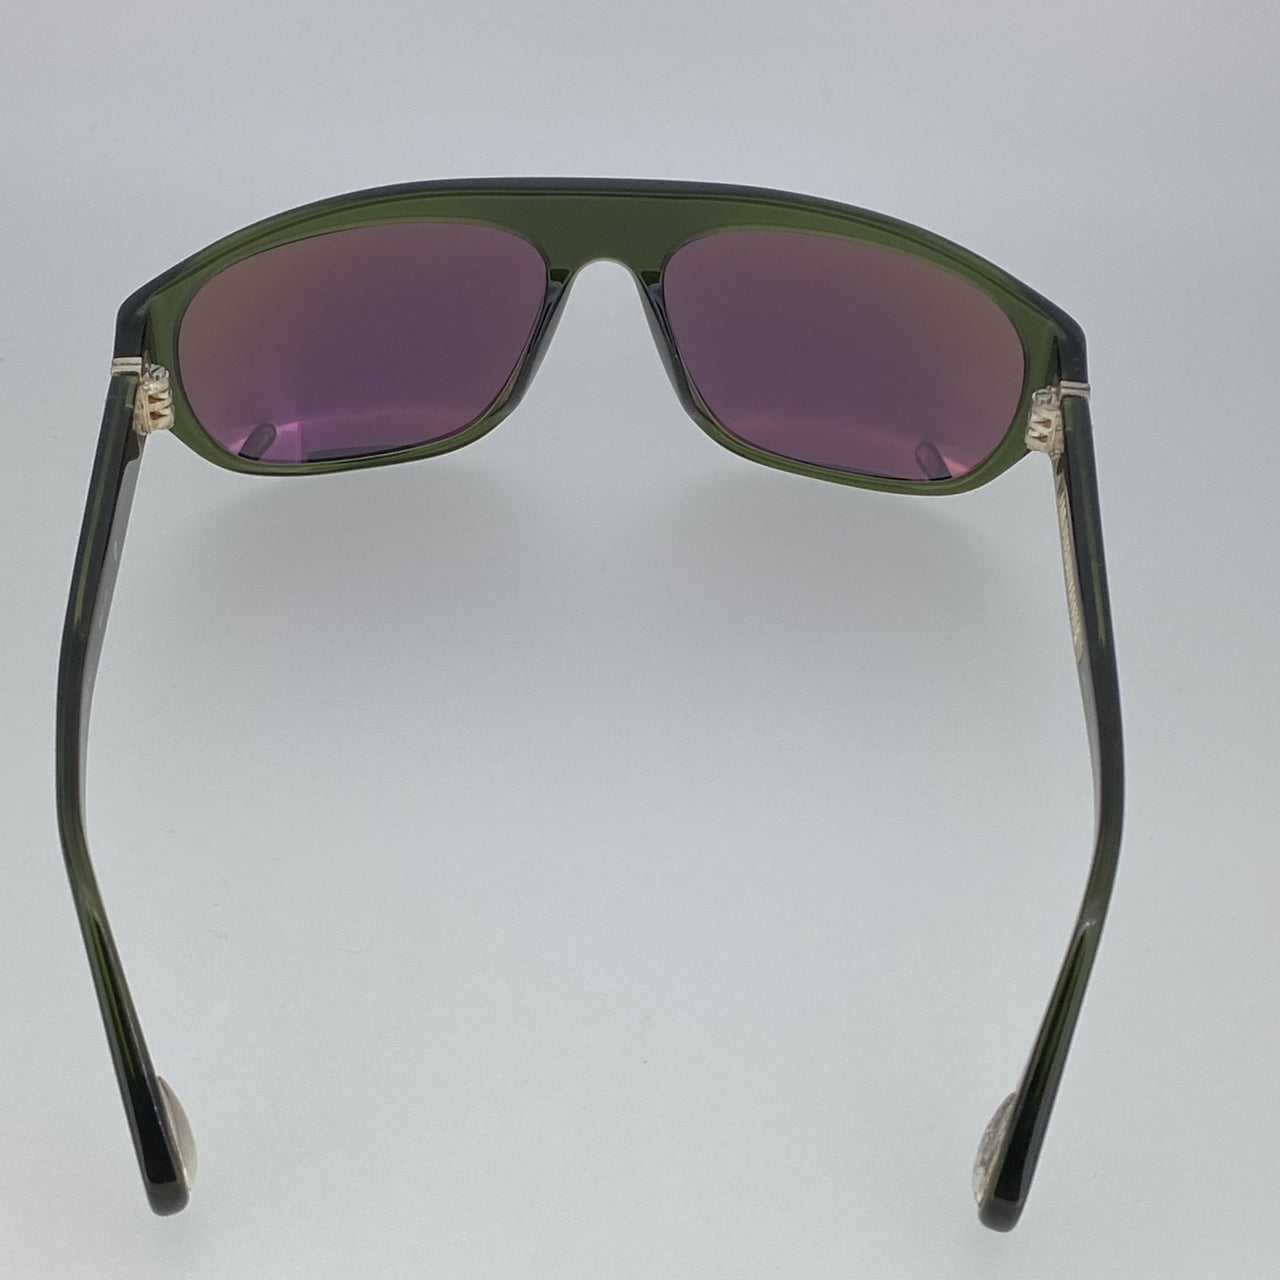 Ann Demeulemeester Sunglasses Flat Top Green 925 Silver with Purple Lenses Category 3 Dark Tint AD1C7SUN - Watches & Crystals